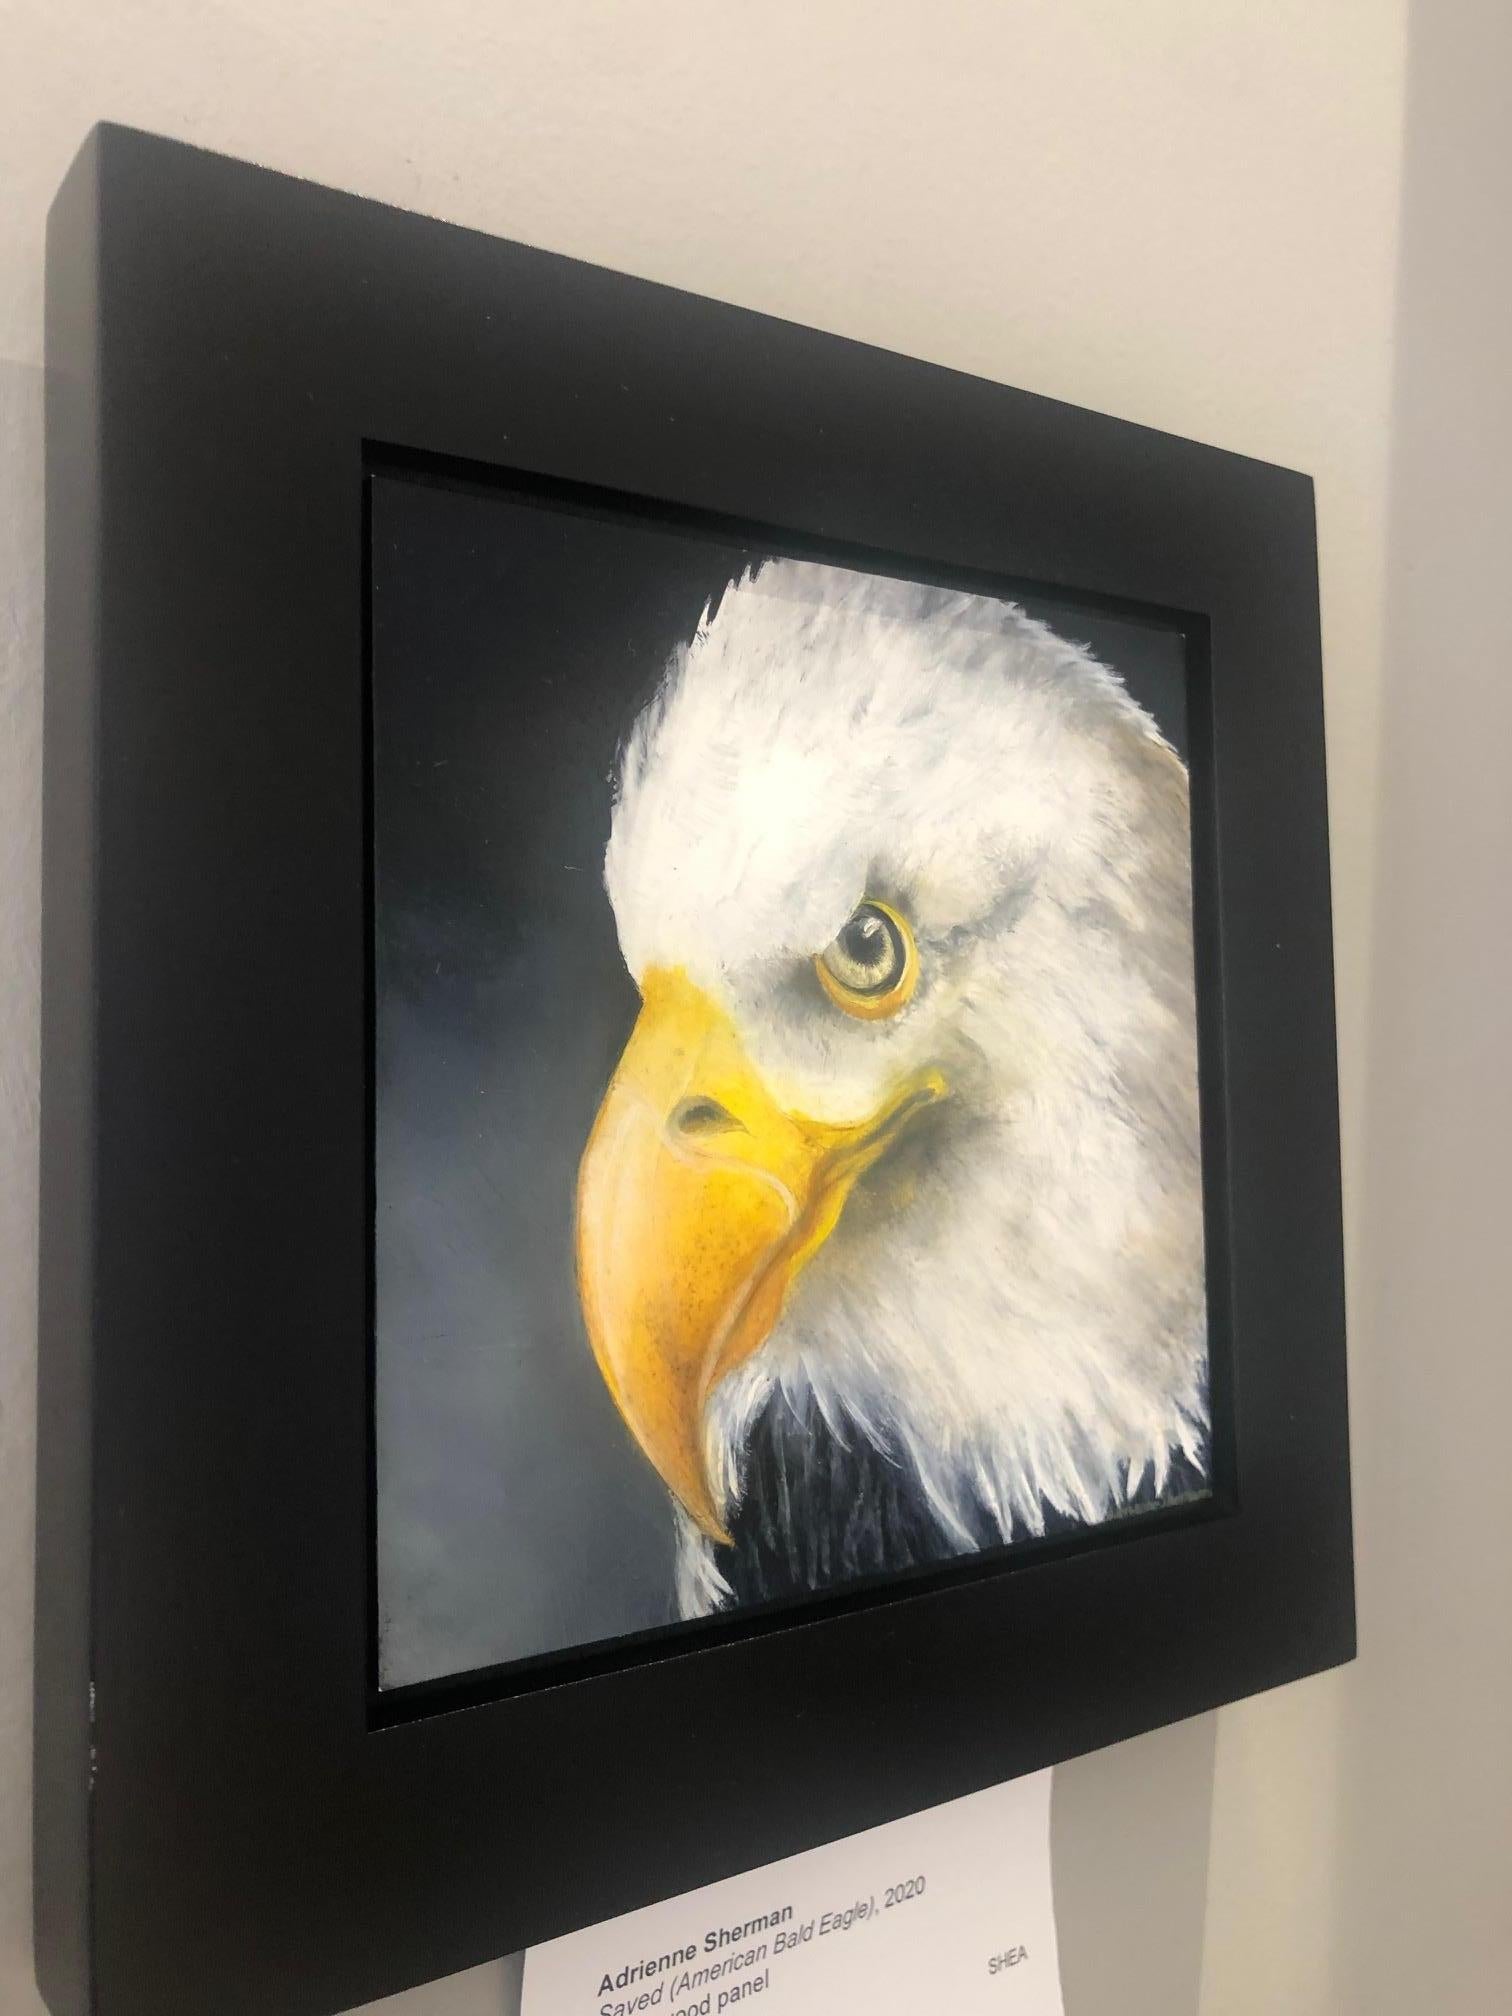 Saved  (American Bald Eagle) - Contemporary Painting by Adrienne Sherman